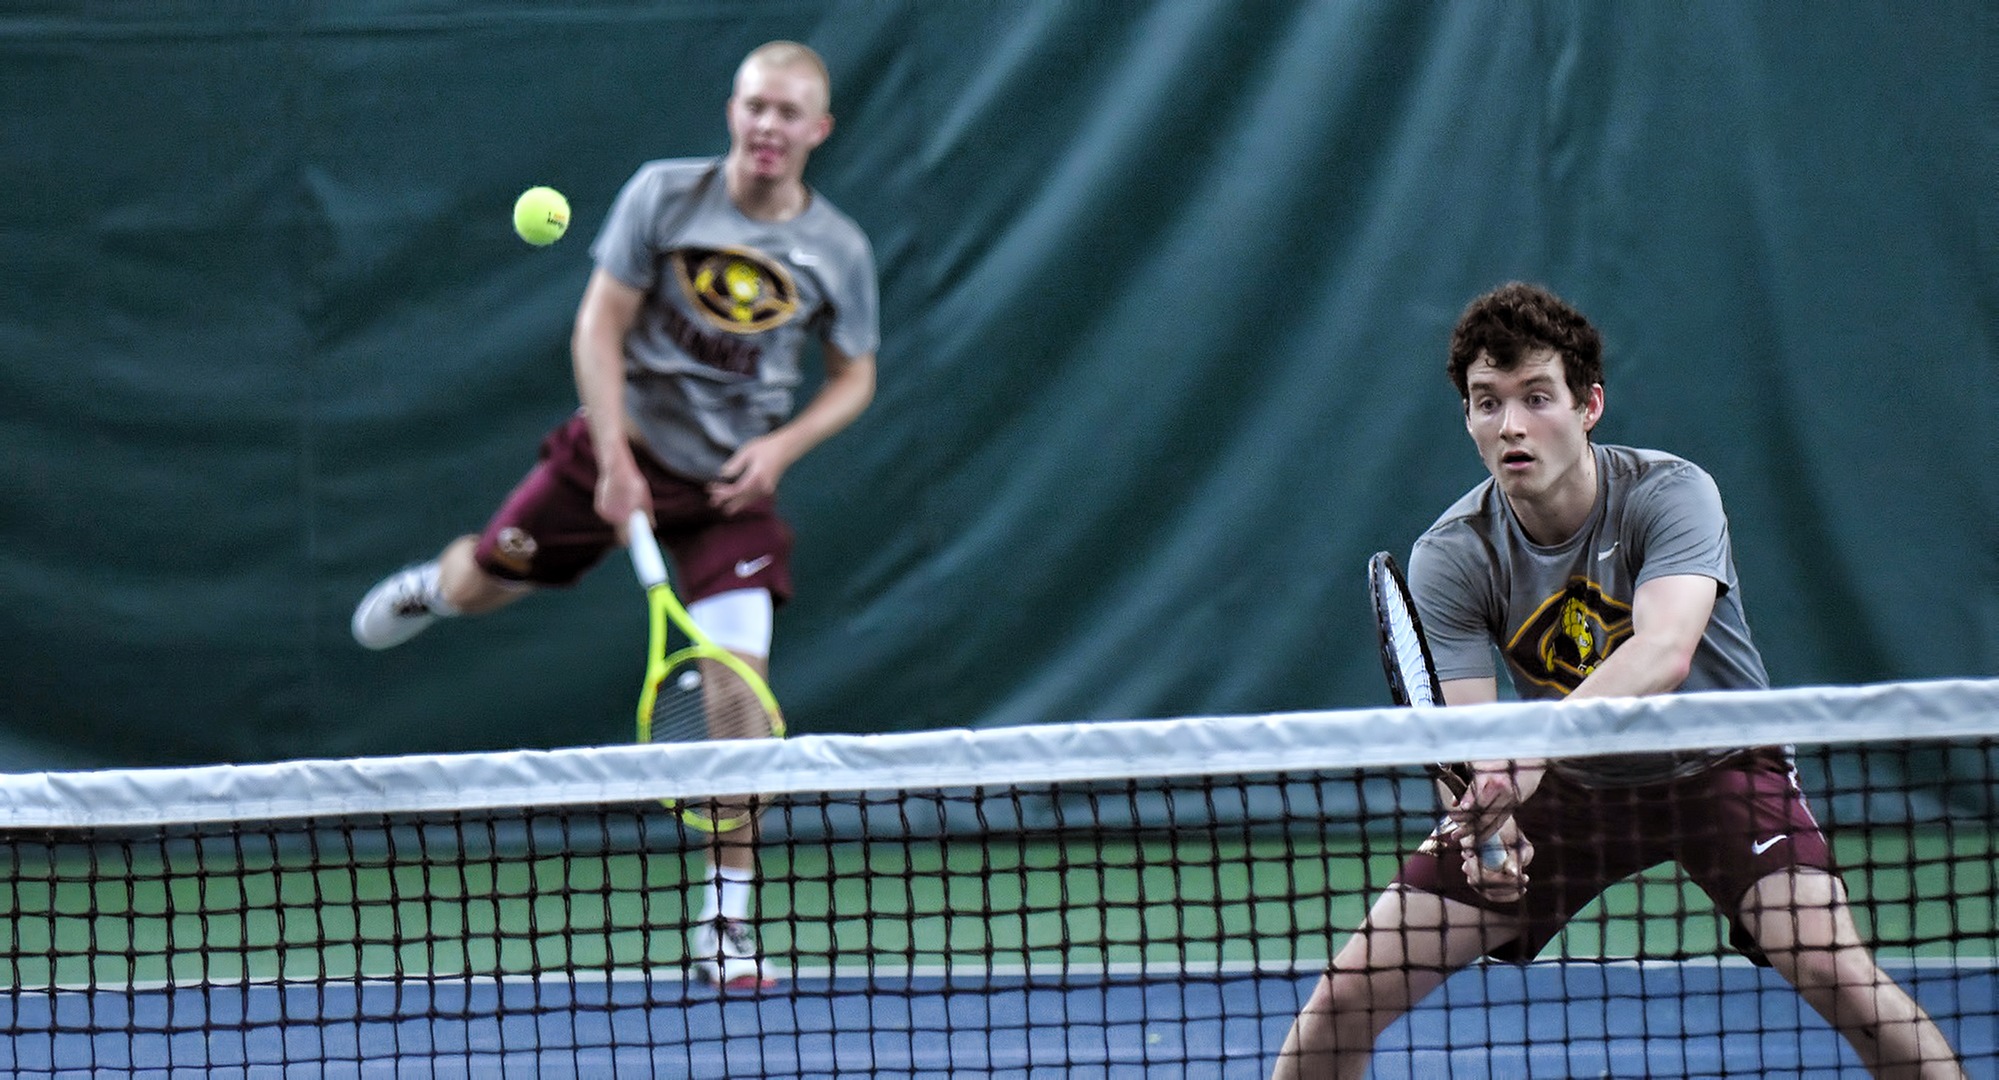 The Cobber No.1 doubles team of Jared Saue (L) and Erik Porter rolled to an 8-1 against St. Scholastica and have now won a pair of matches on the year.